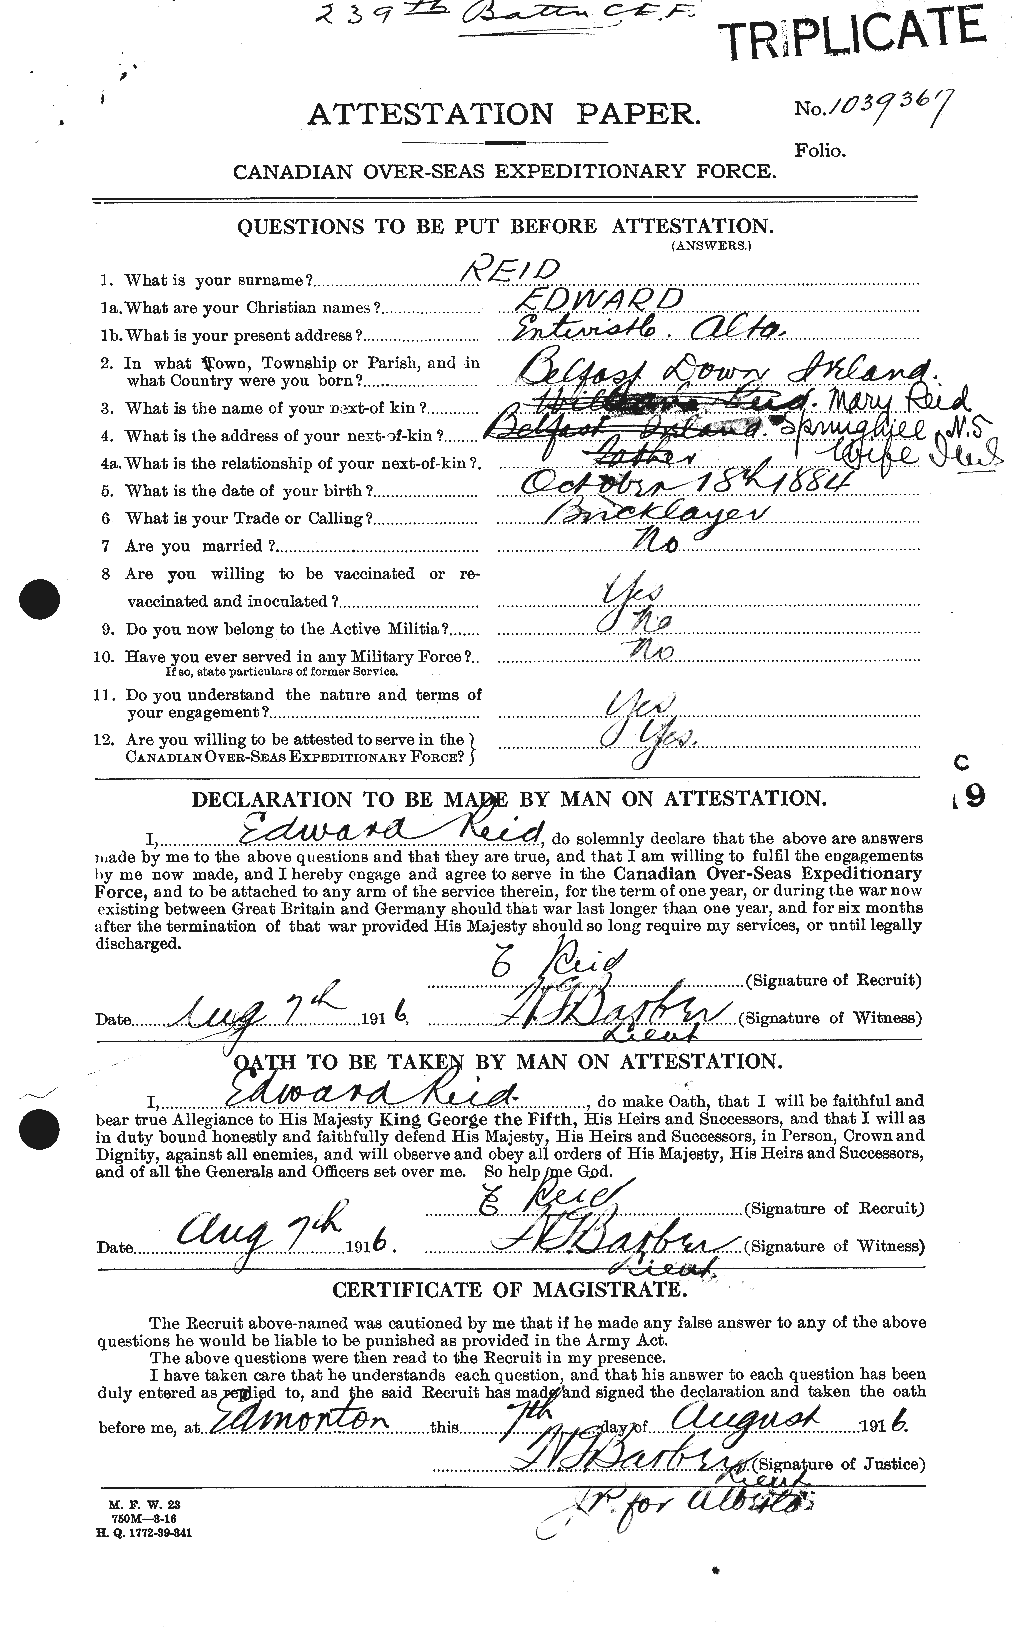 Personnel Records of the First World War - CEF 597982a